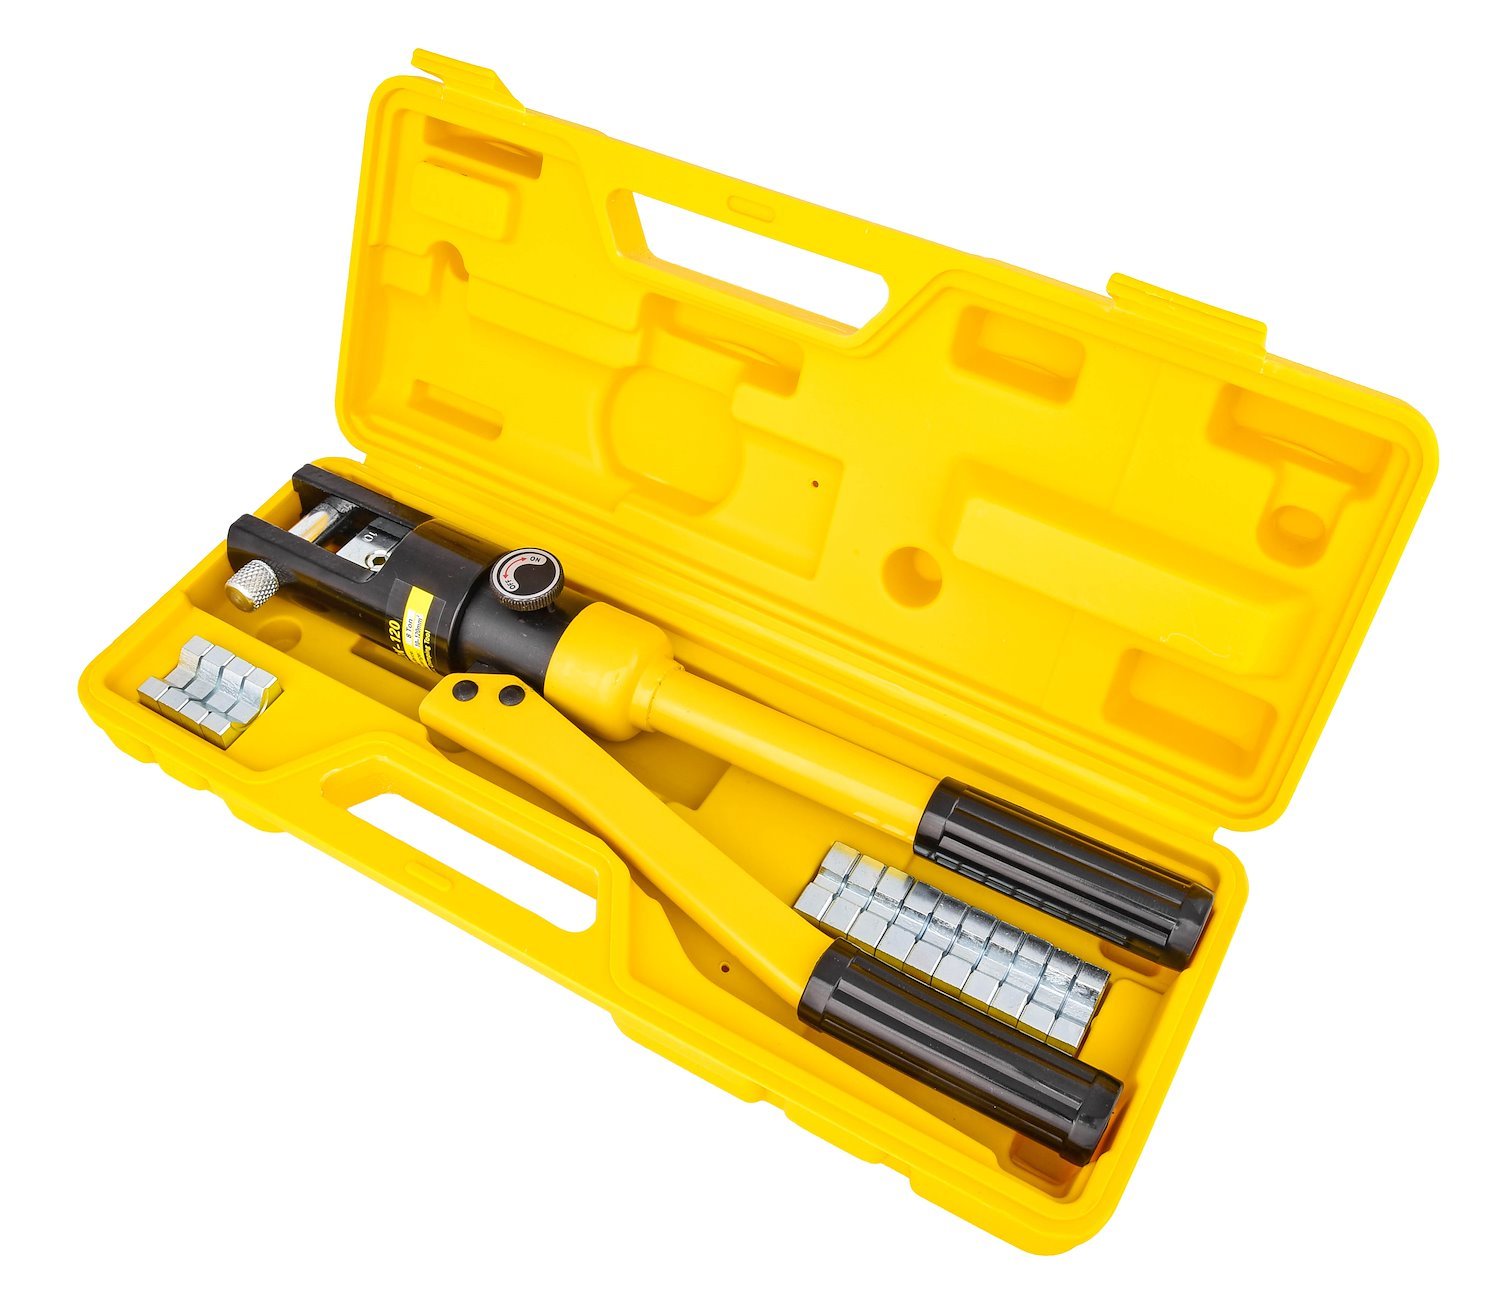 8-Ton Hydraulic Wire Crimping Tool for Crimping 7-4/0 Gauge Wire & Battery Cable Terminals